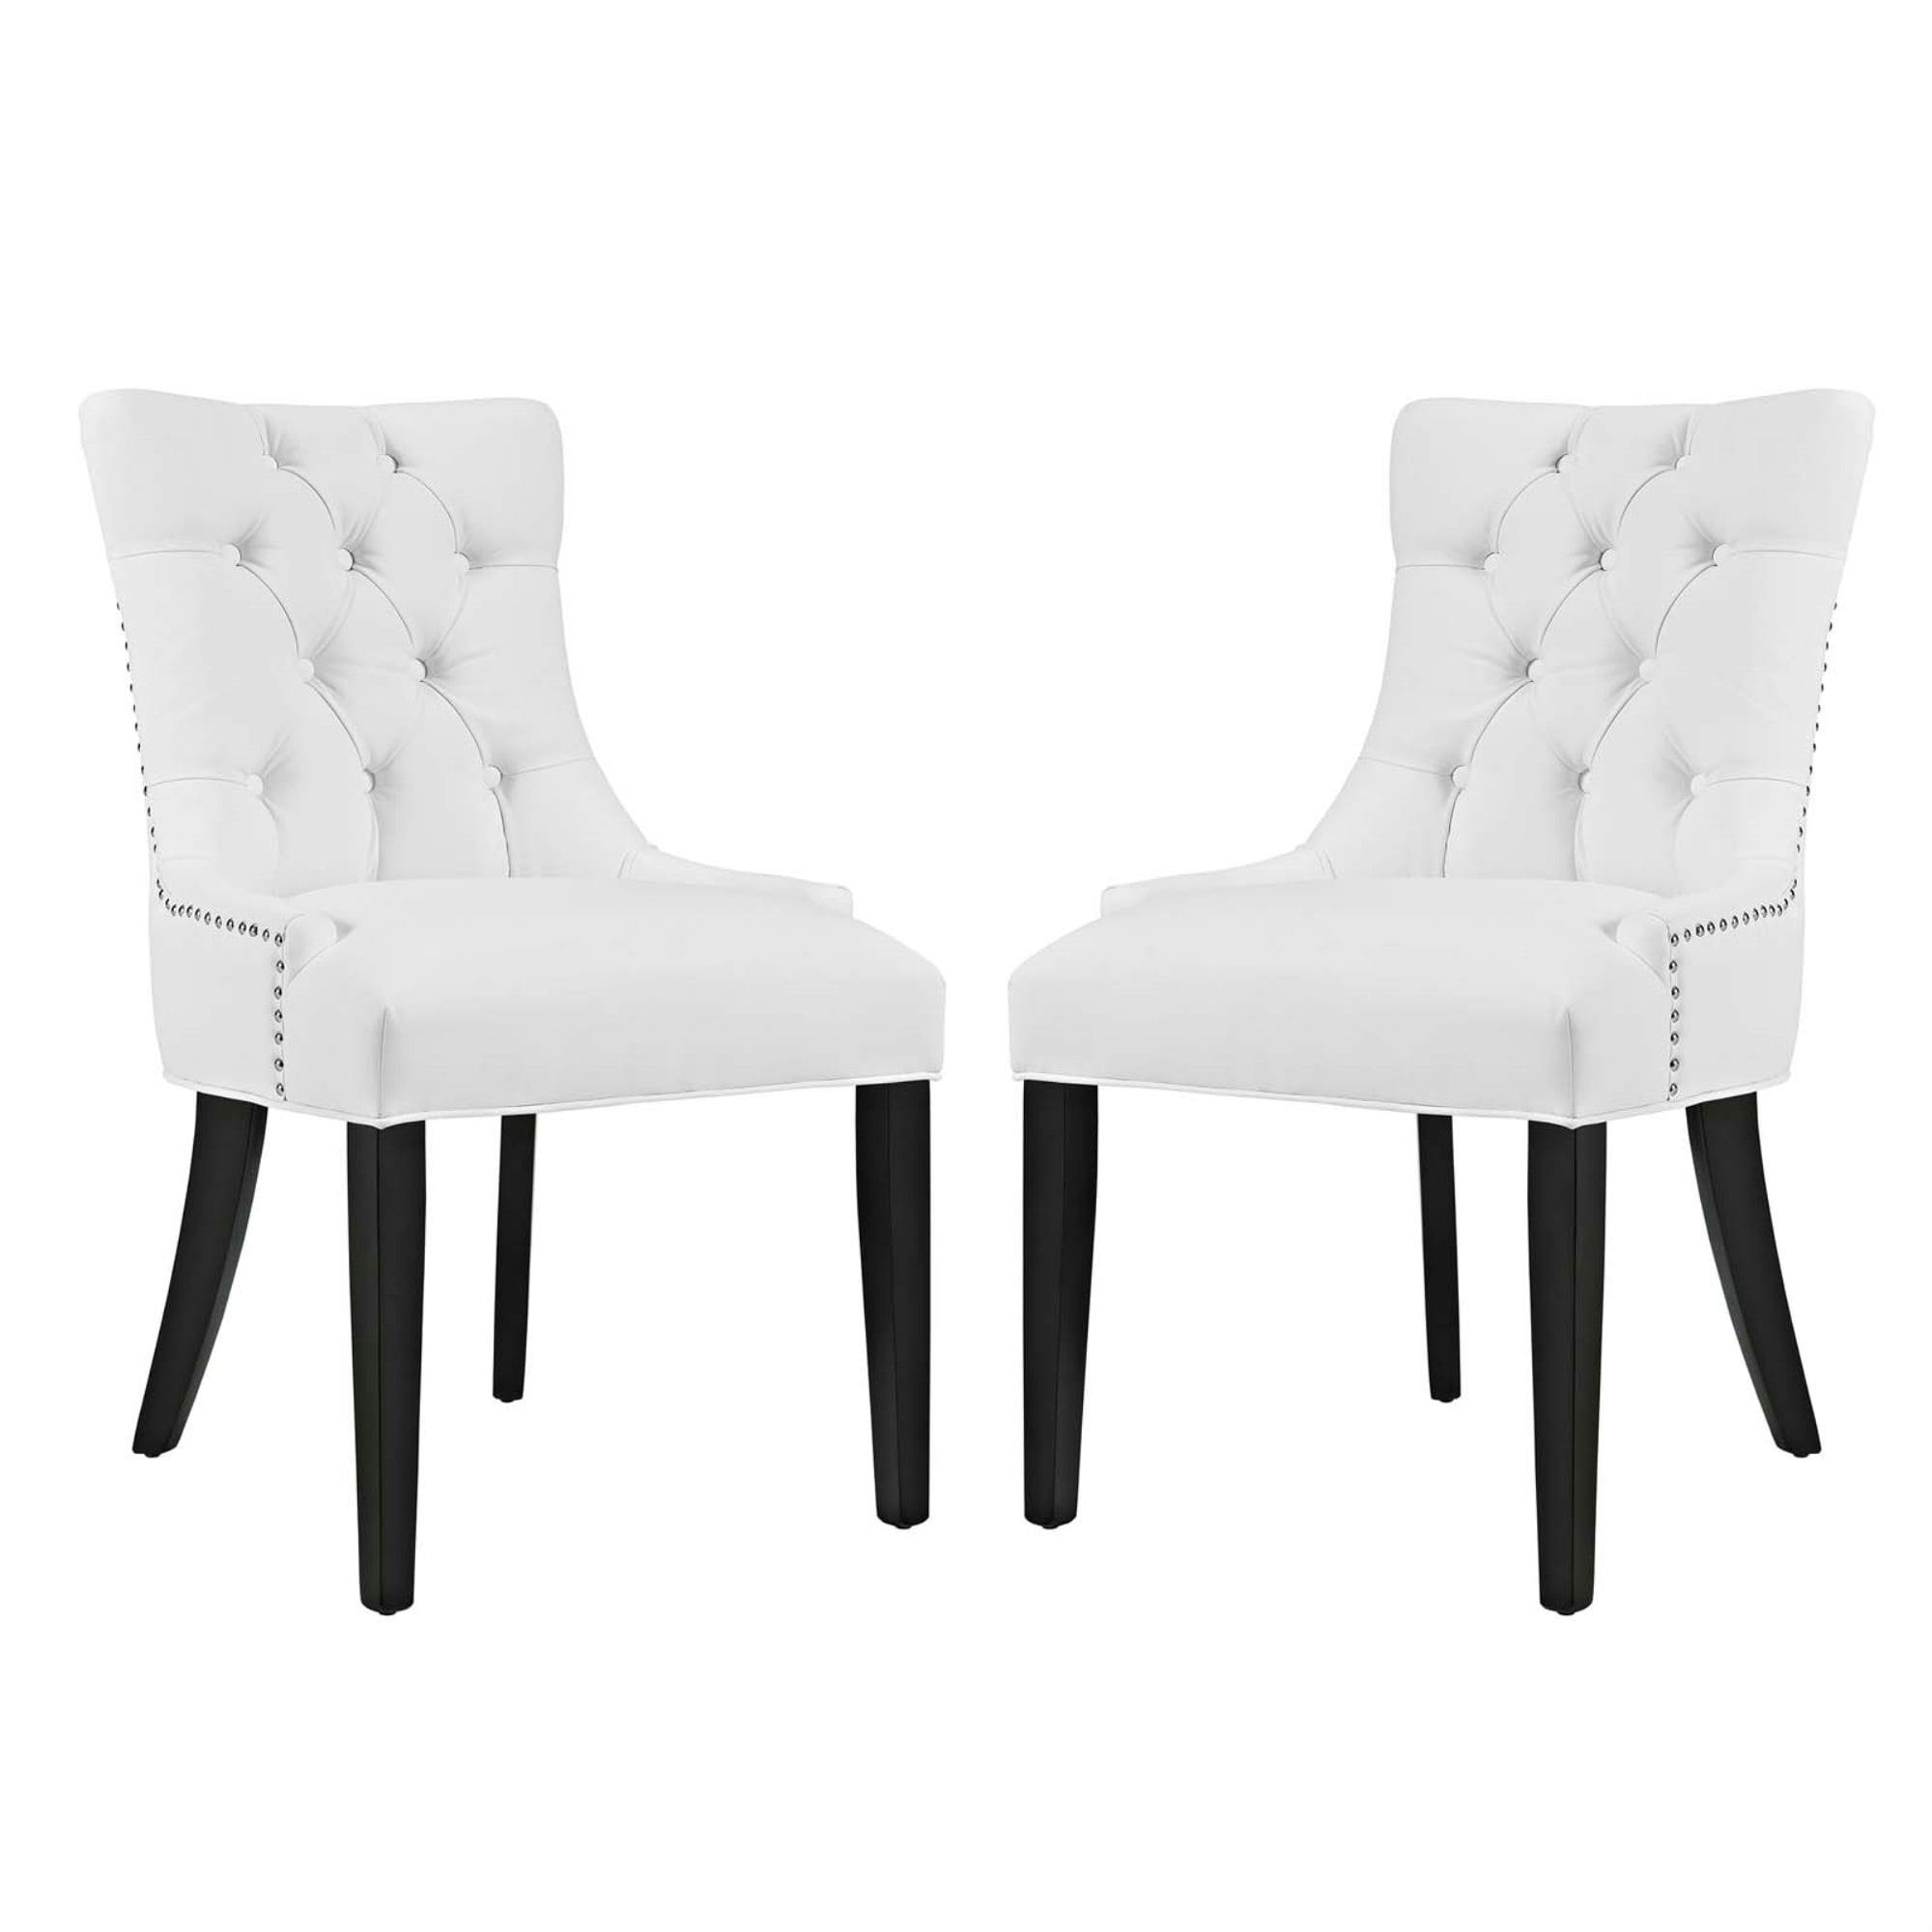 Regal White Tufted Leatherette Side Chair with Nailhead Trim